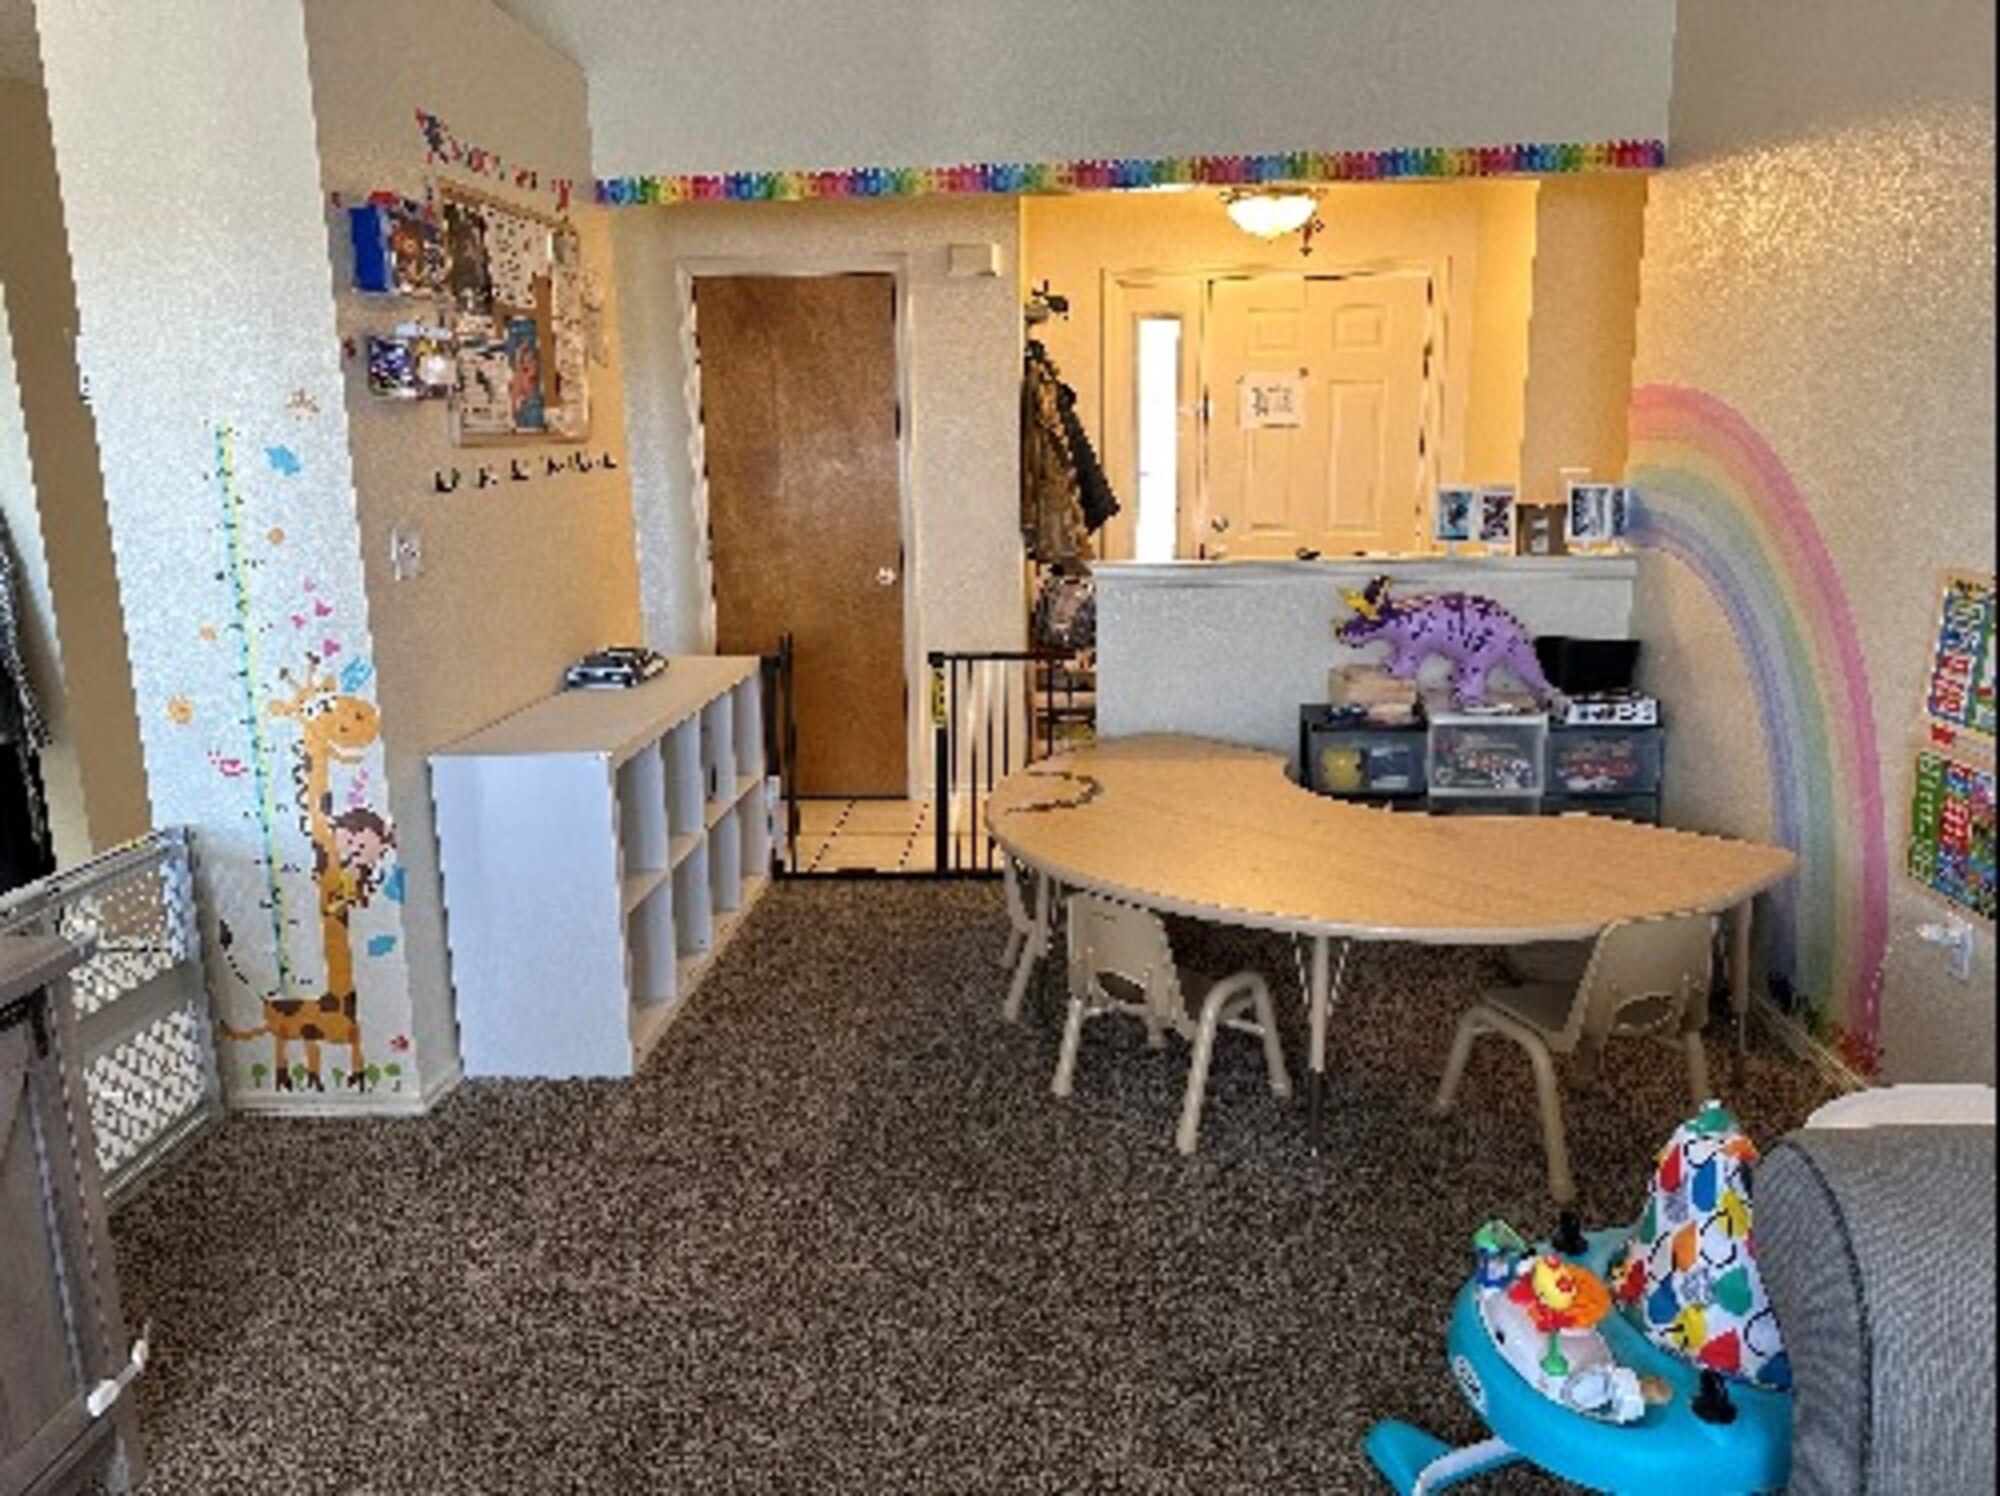 A picture of Roisveli Matos’ Family Child Care (FCC) home is showcased at Altus Air Force Base, Oklahoma, Jan. 29, 2024. Matos transformed her home and opened her new facility to provide care for Airmen and families. (Courtesy photo by Roisveli Matos)